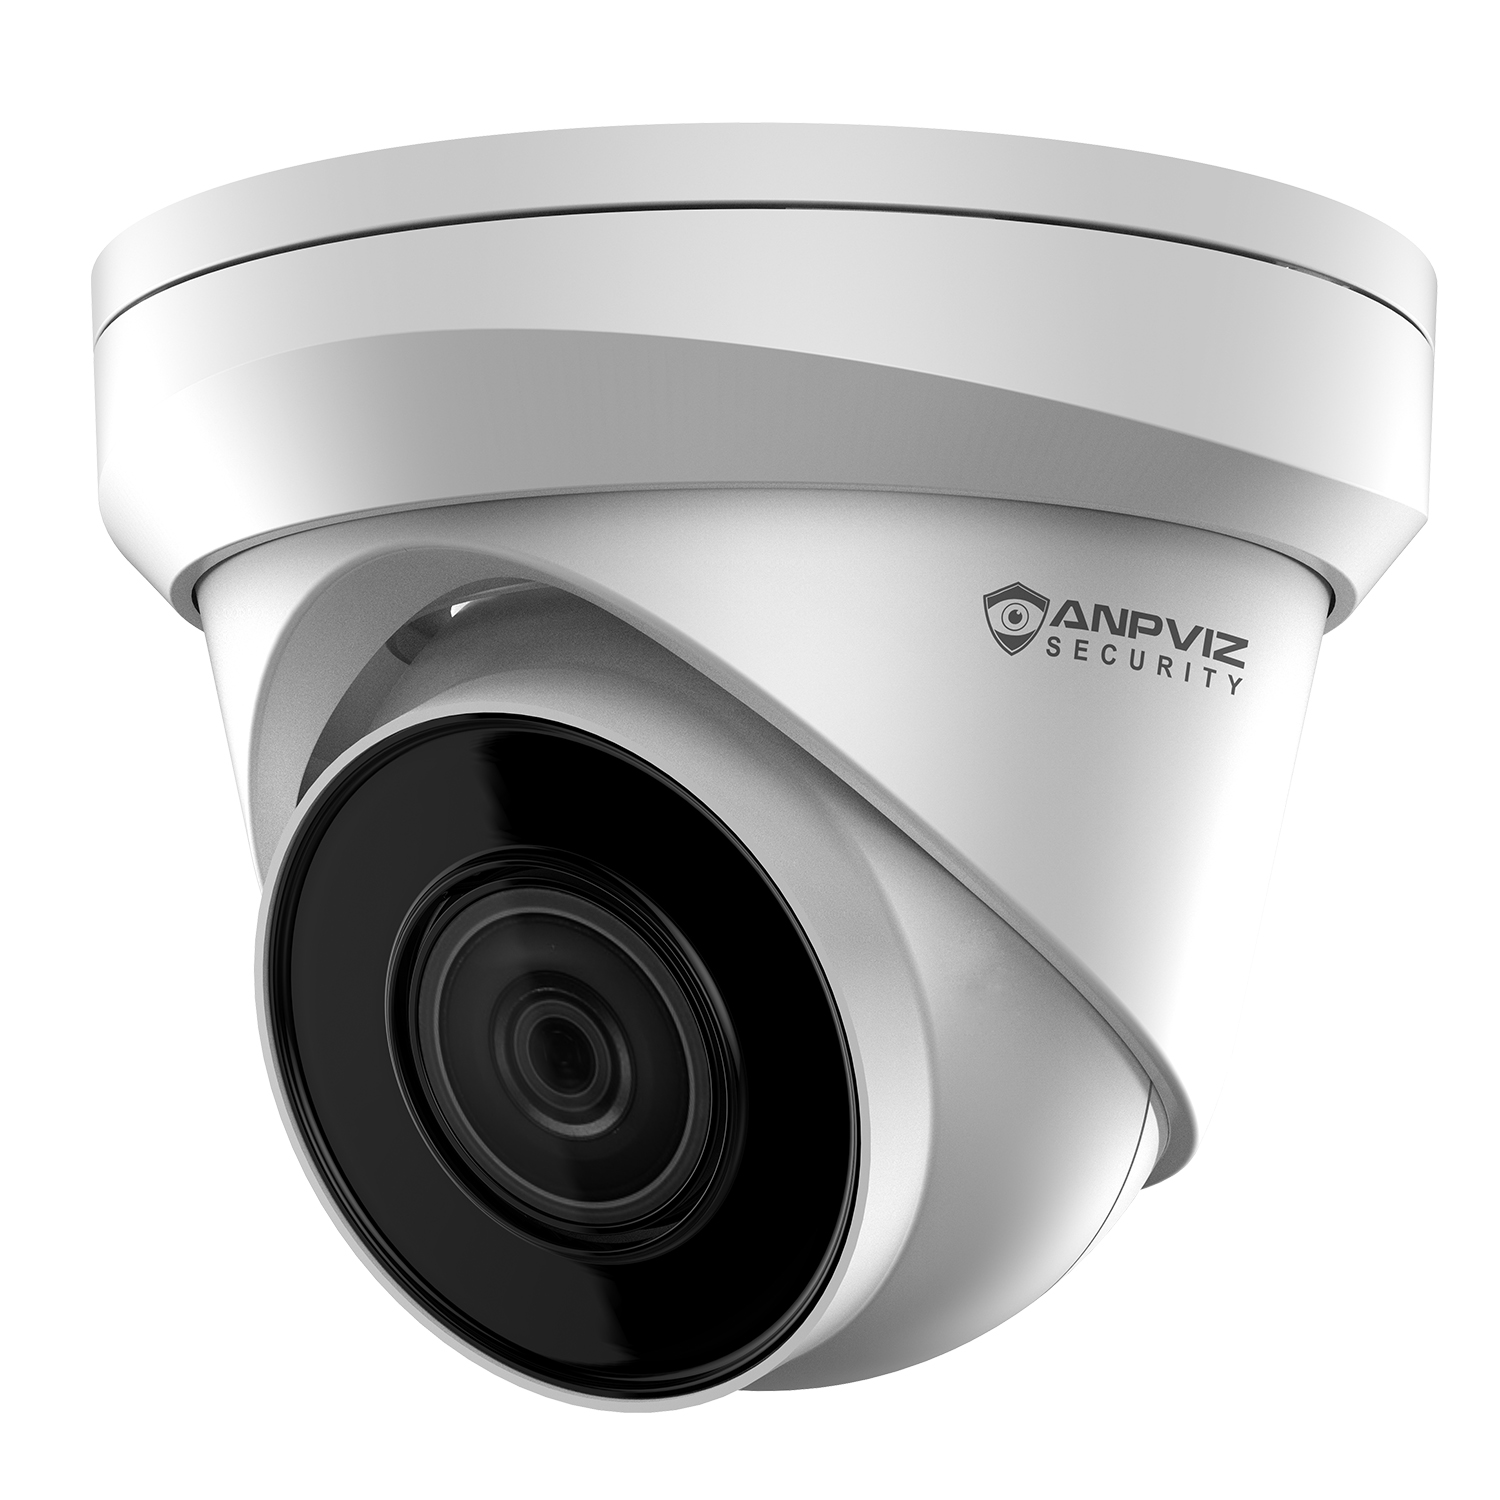 Motion Detection,IP67 RTSP Compatible with Hikvision 5MP PoE Security IP Camera with Audio,Turret Security Camera Outdoorwith 98FT EXIR Night Vision,2.8mm Wide Angle,Built in Mic H.265